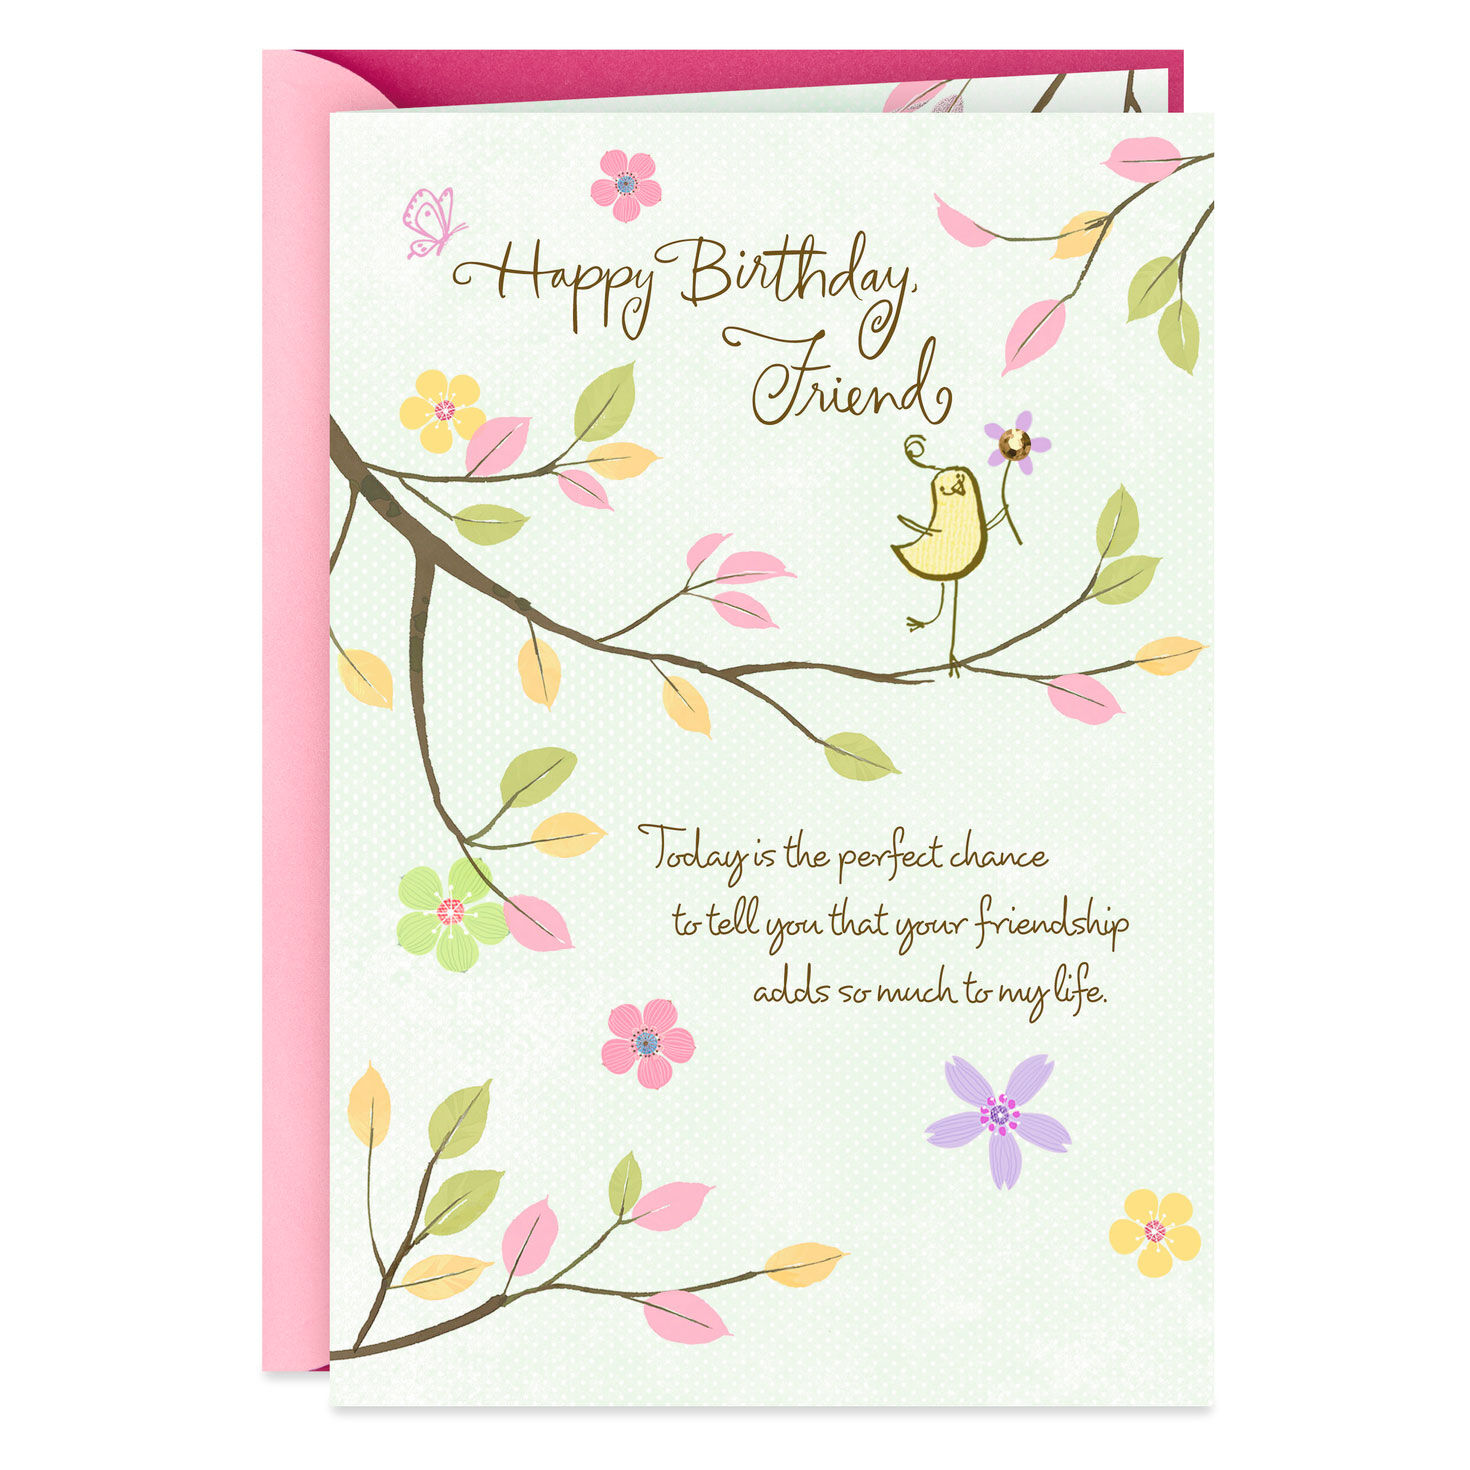 Thankful for You Birthday Card for Friend for only USD 2.99 | Hallmark